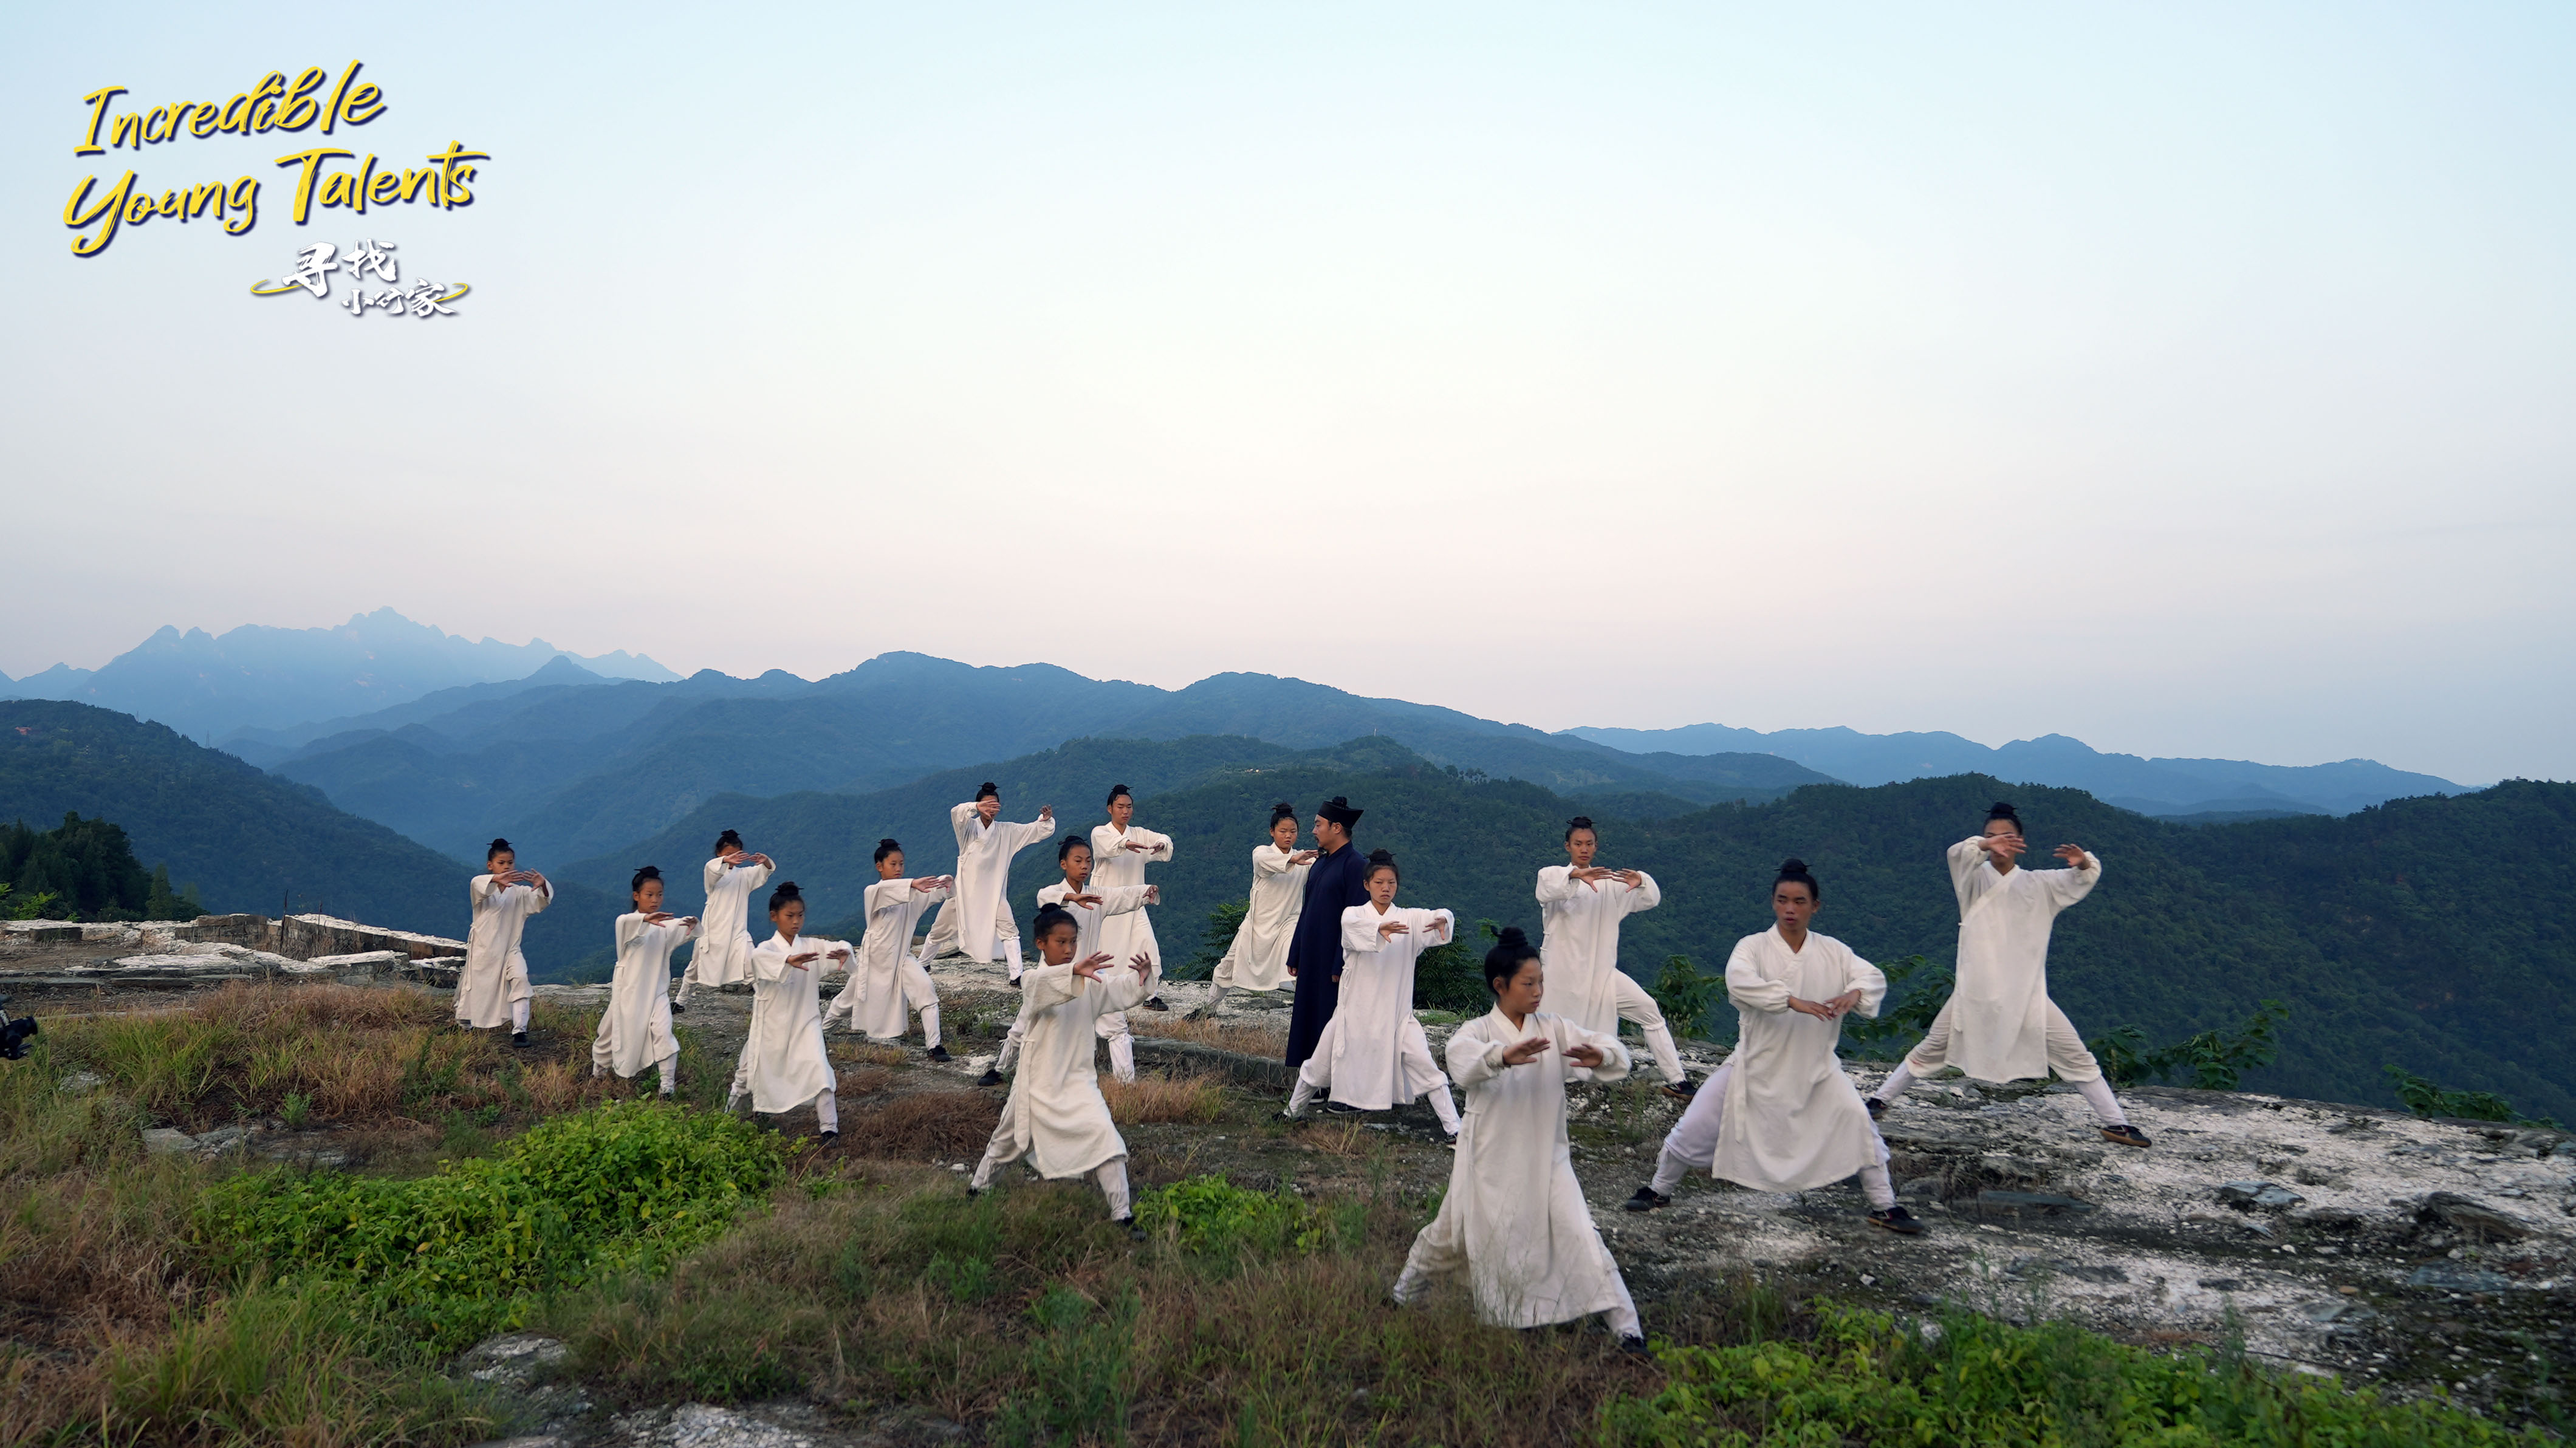 Tai Chi master Hu Weizhe (center) teaches young apprentices basic routines in the Wudang Mountains. /CGTN